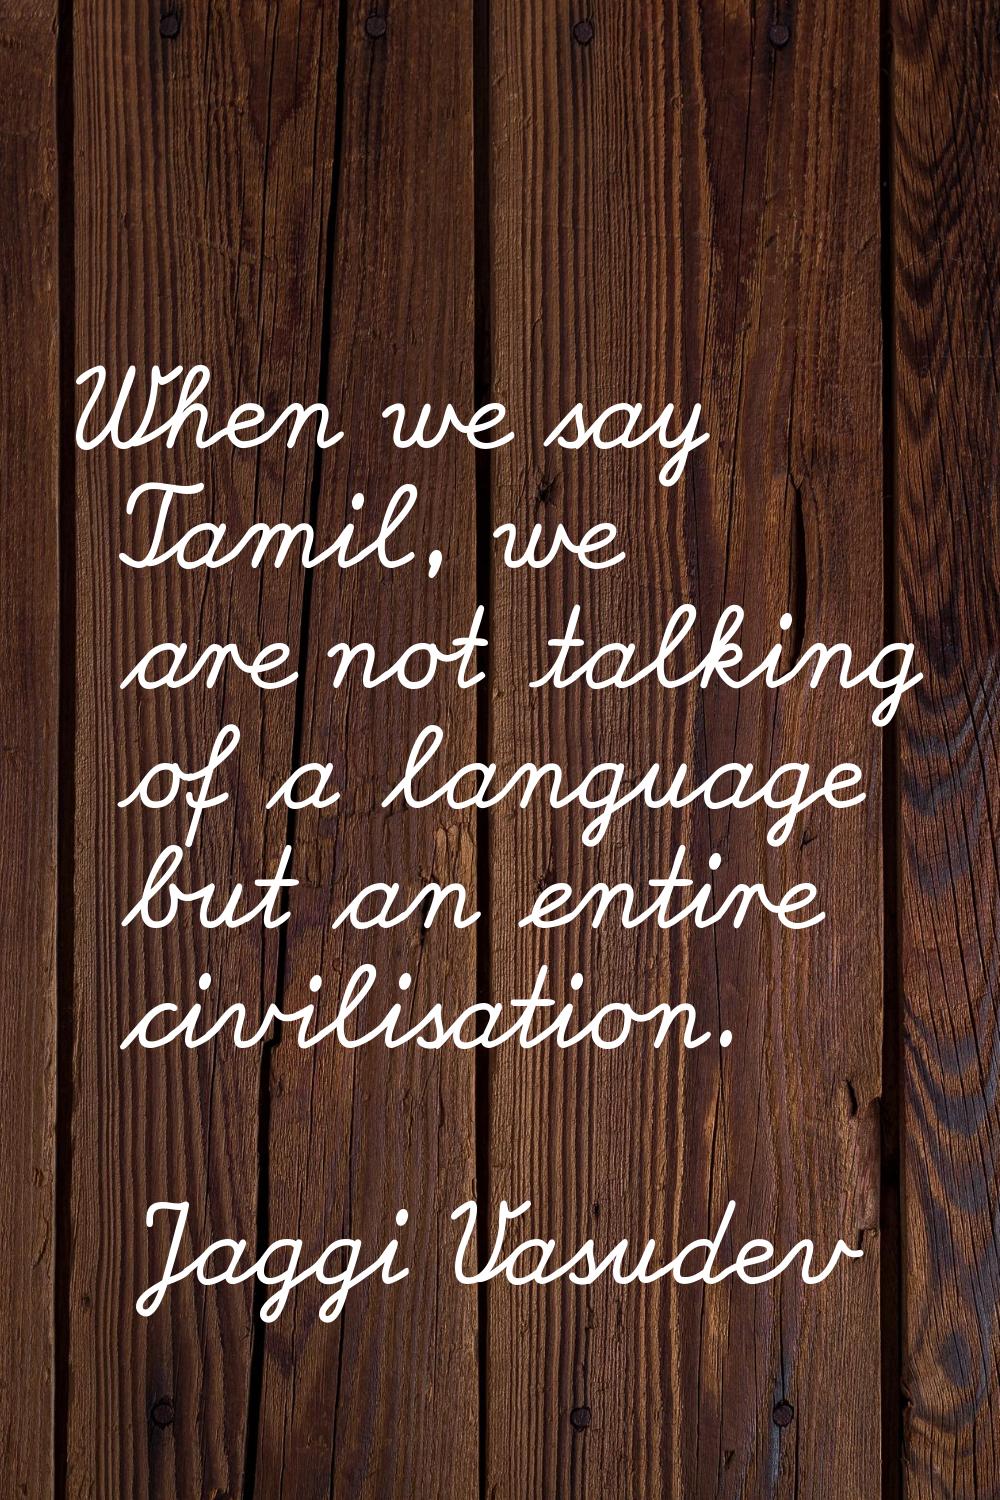 When we say Tamil, we are not talking of a language but an entire civilisation.